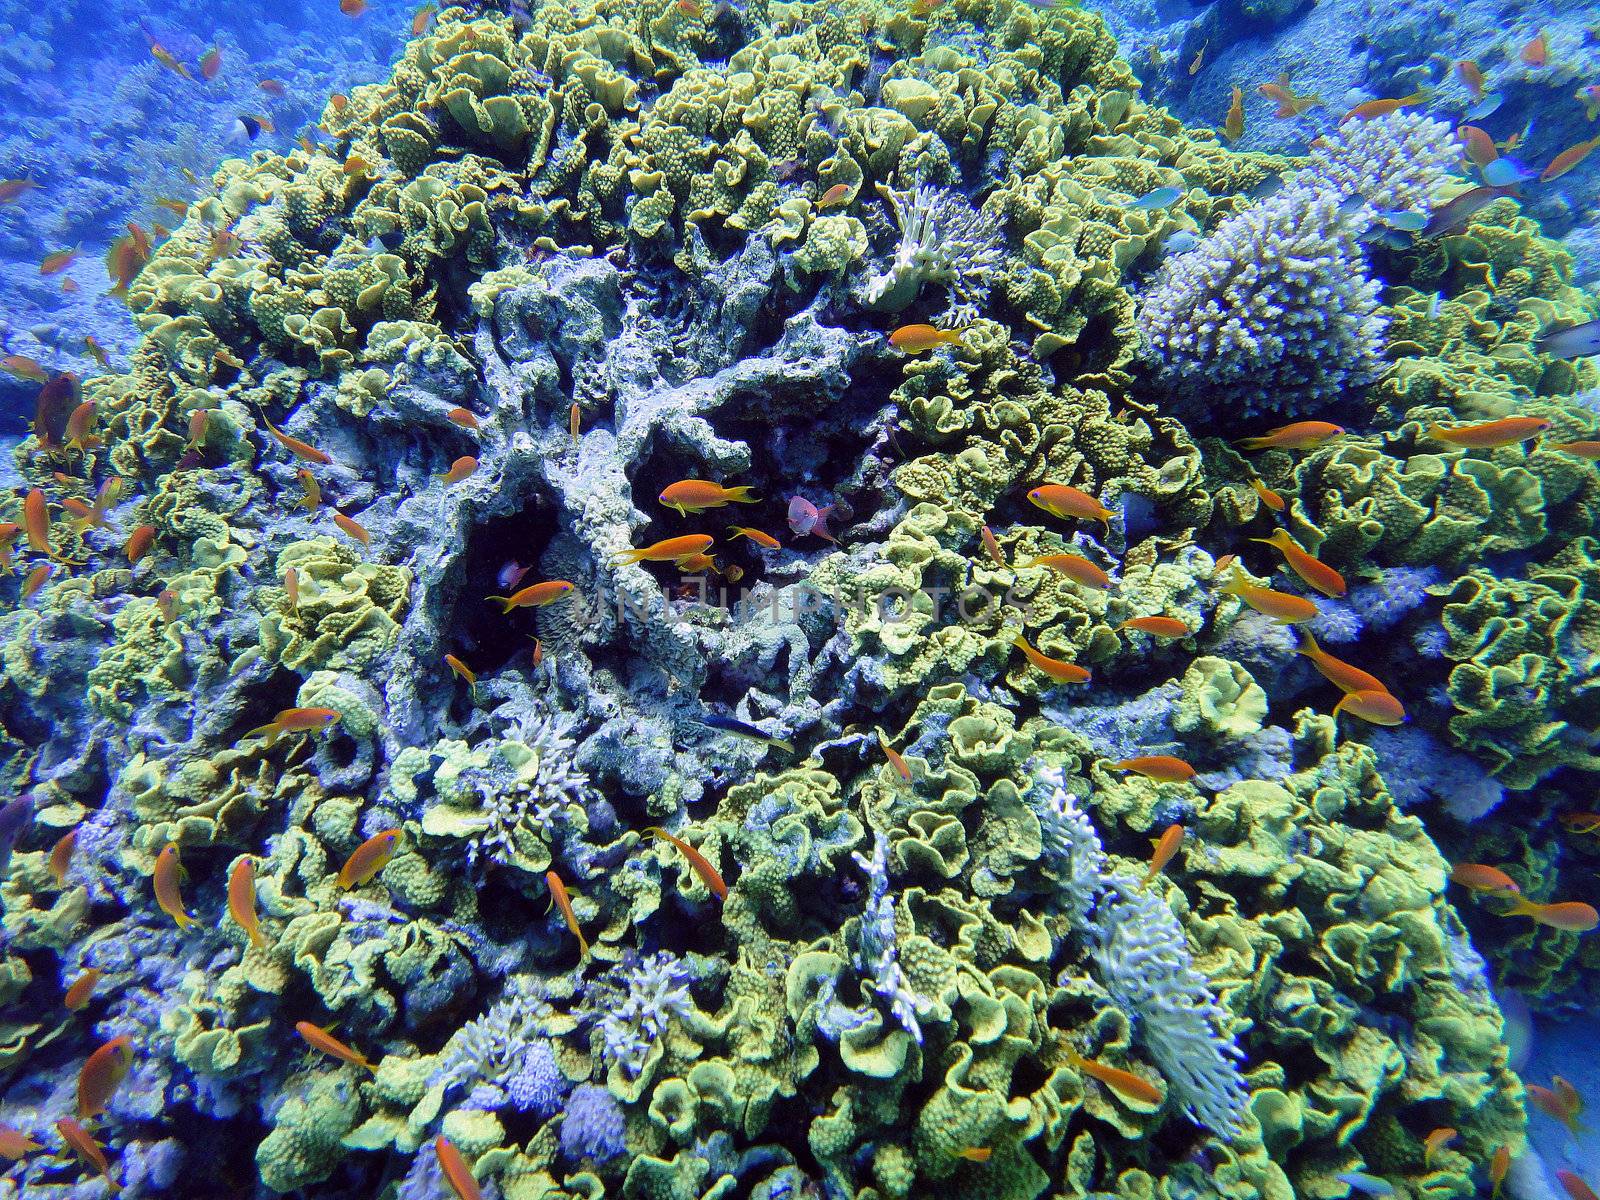 Coral and red fishes, Red sea, Sharm El Sheikh, Egypt.